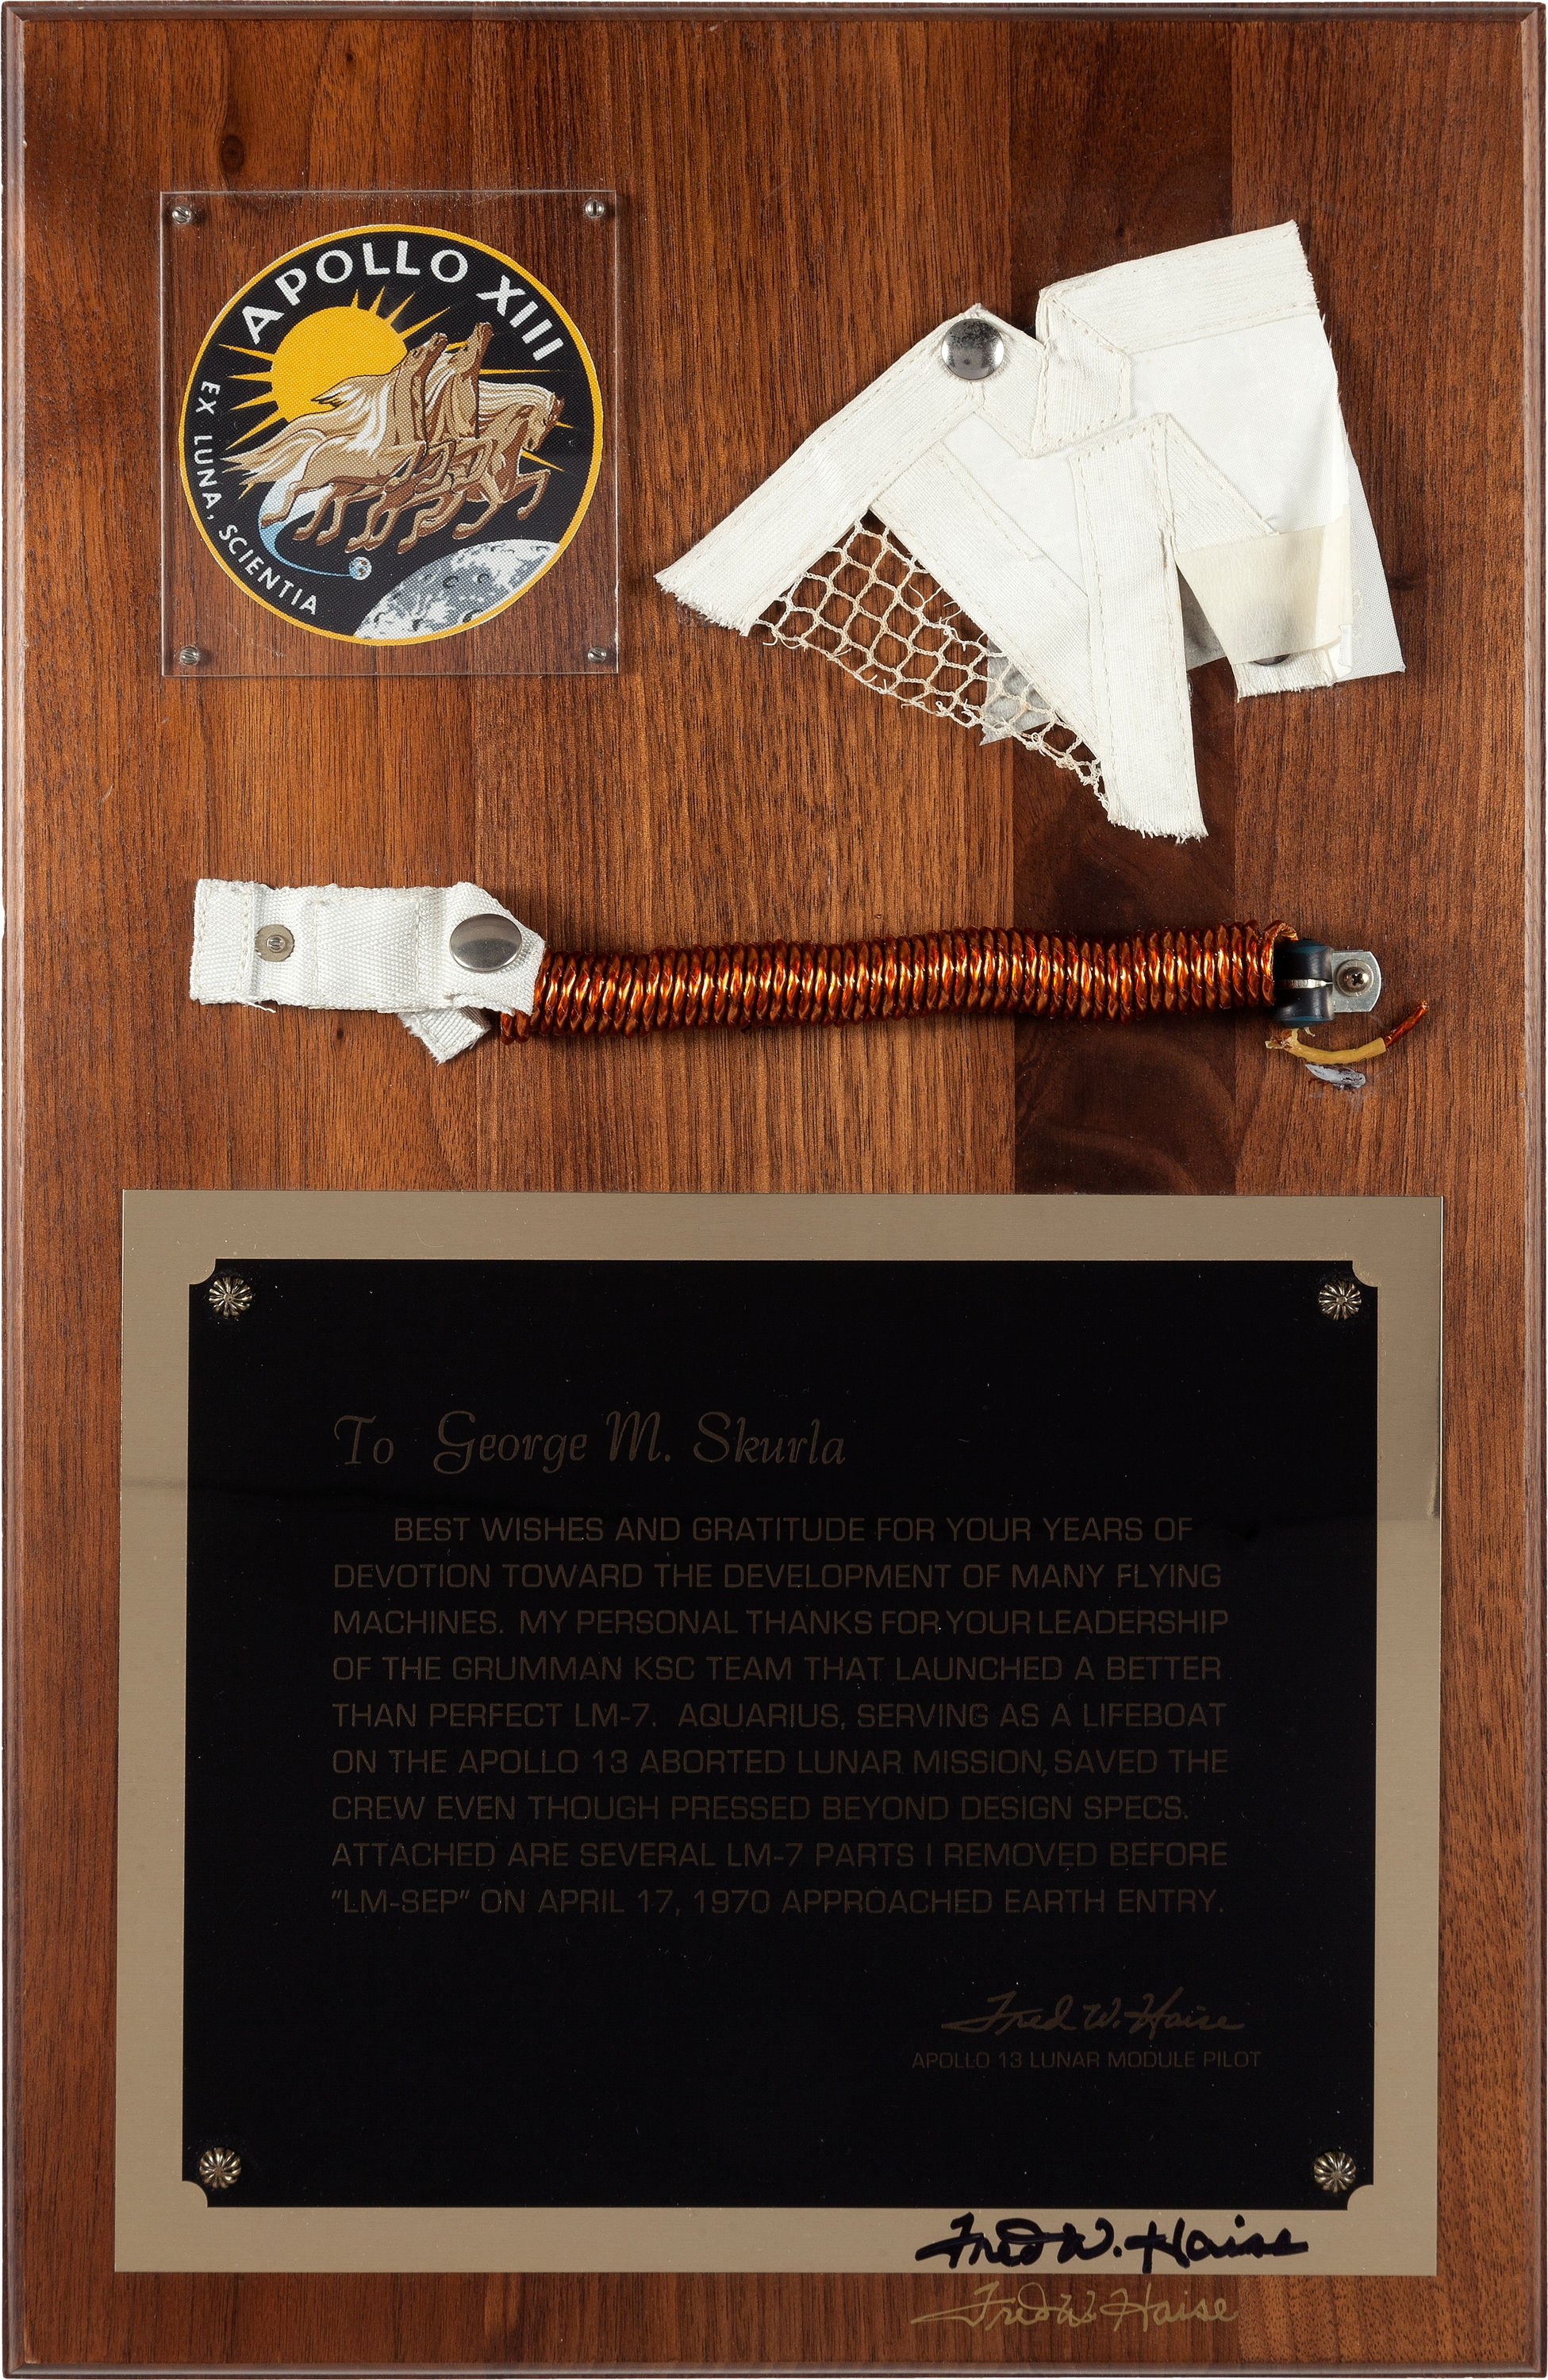 Mounted on a plaque as presented by astronaut Fred Haise to lunar module maker Grumman's George M. Skurla, the material is united by an engraved plate on which Haise thanks Skurla for saving the life of the crew with his incredible spacecraft. The presentation piece sold for $12,500. Heritage Auctions image